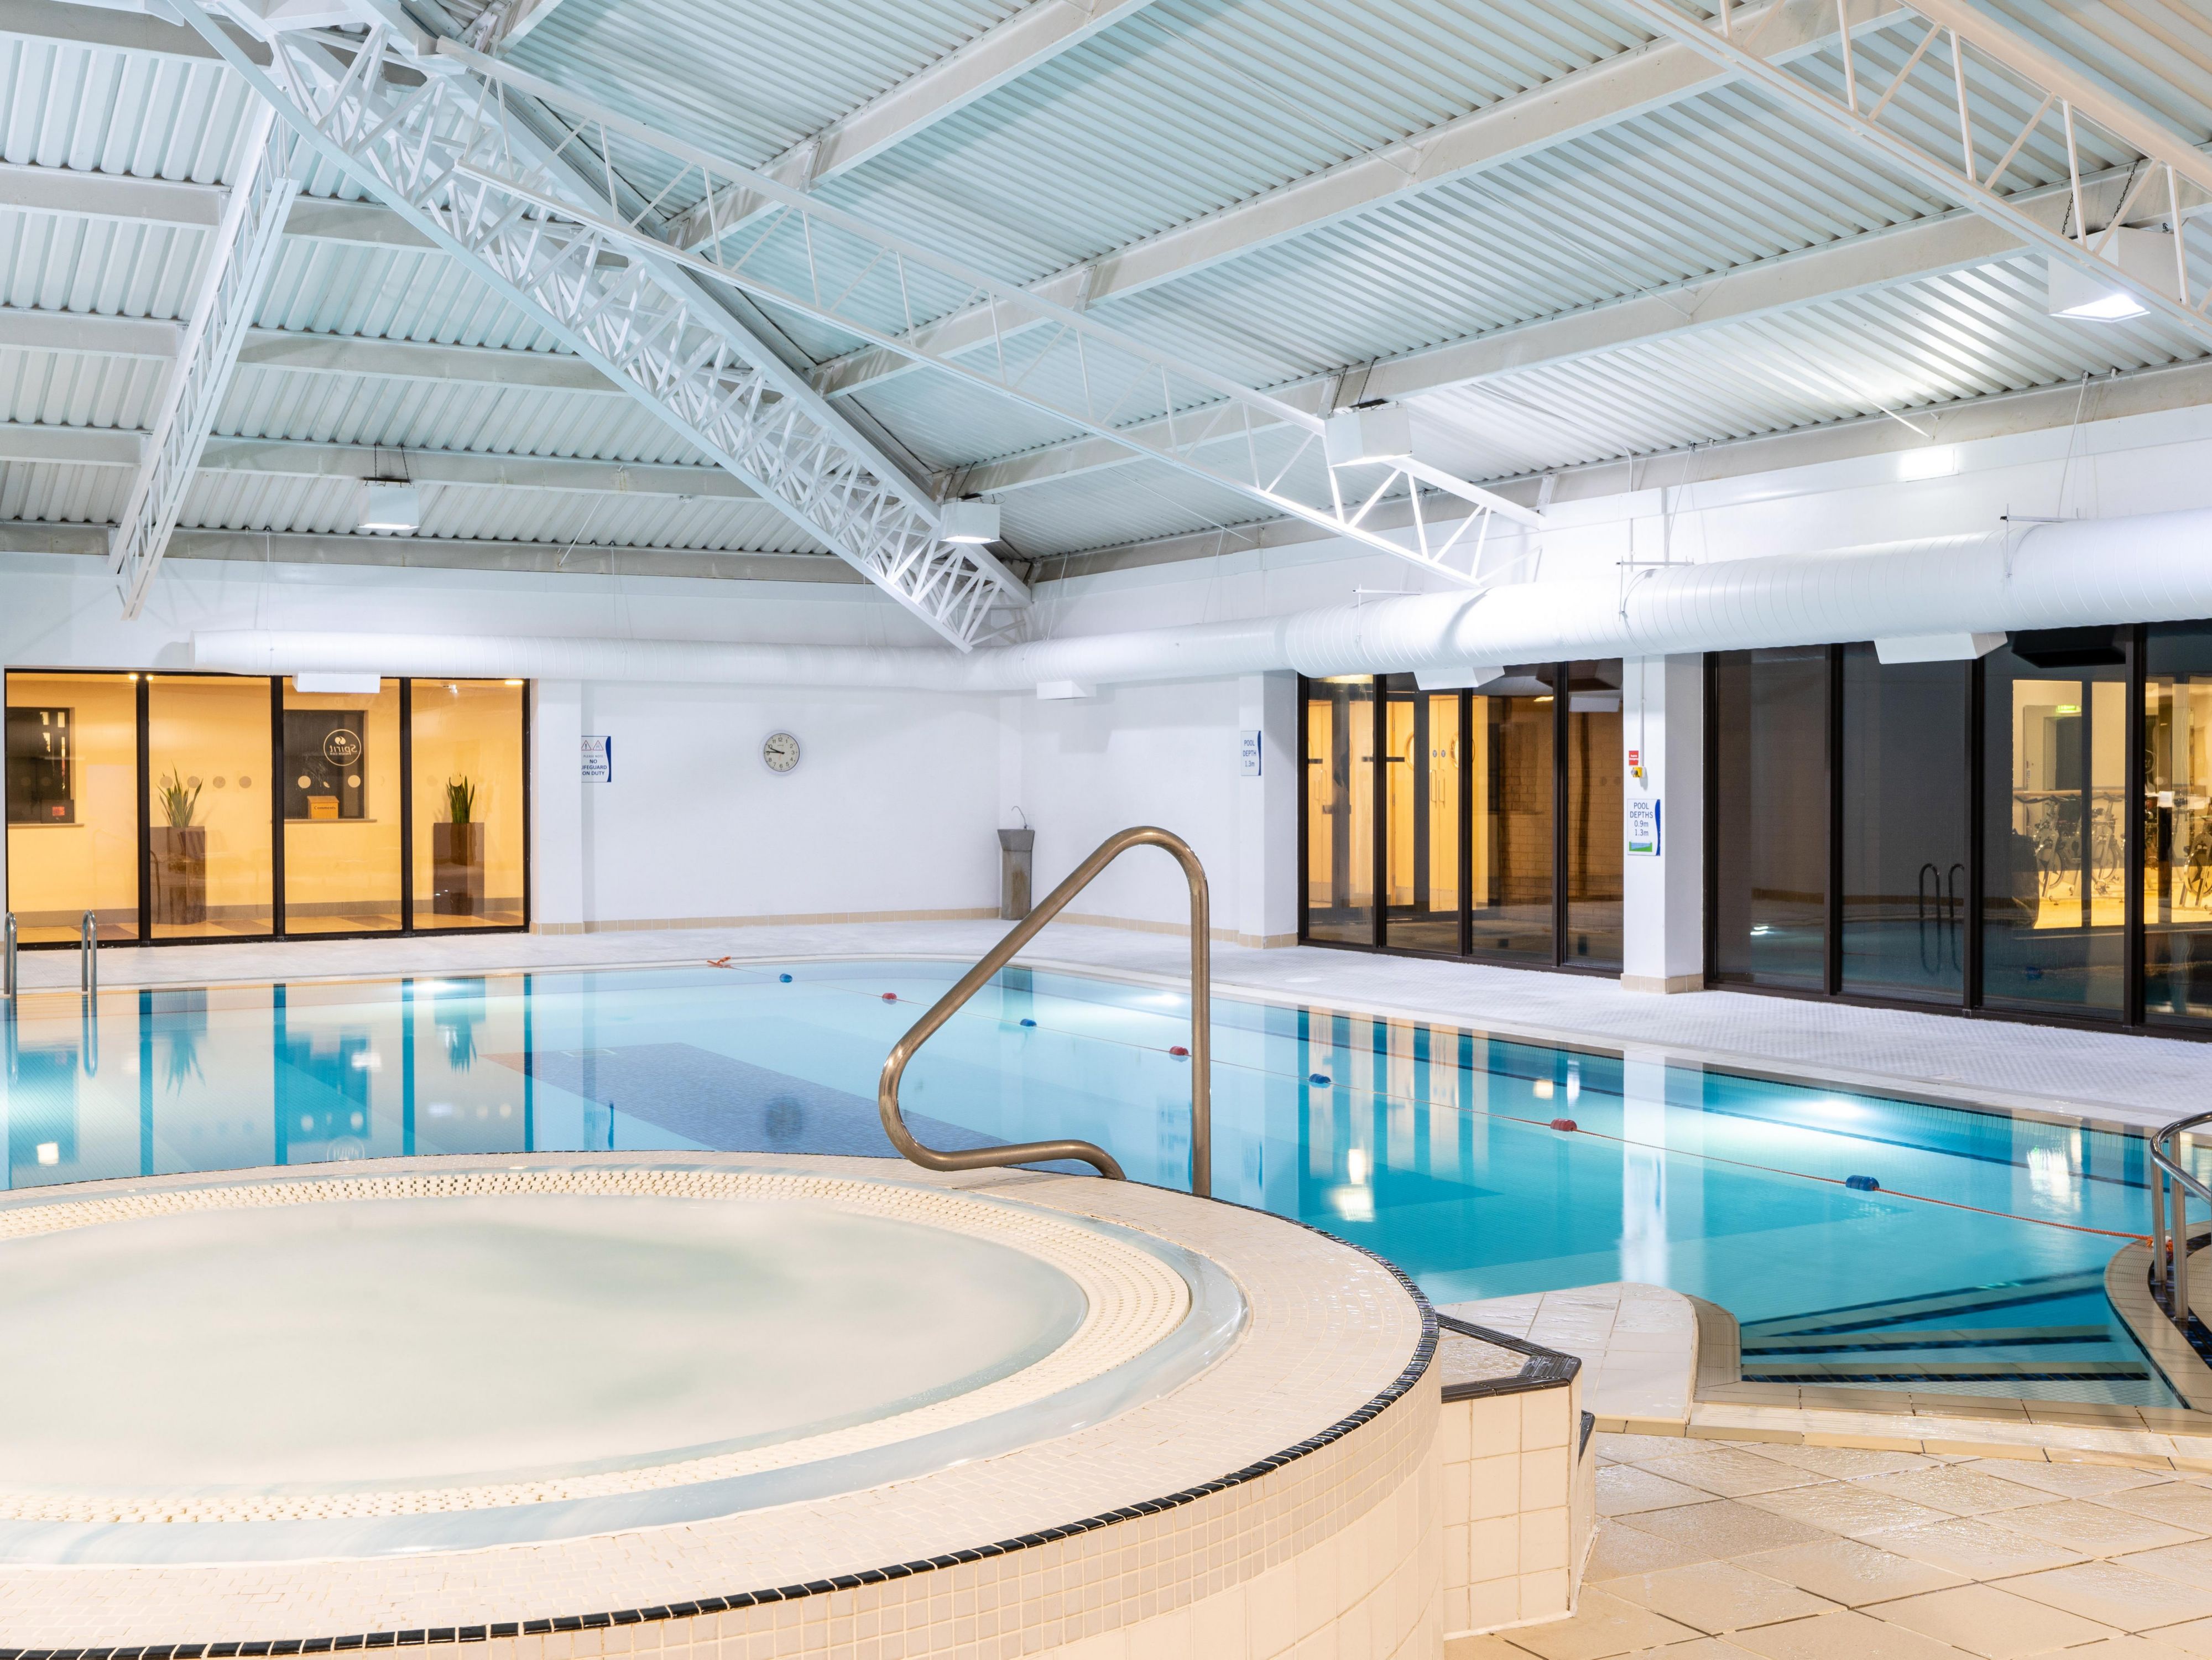 Did you know we have an onsite, fully equipped health club? Our Health and Fitness Centre offers a range of cardiovascular equipment and free weights, as well as a heated indoor pool.